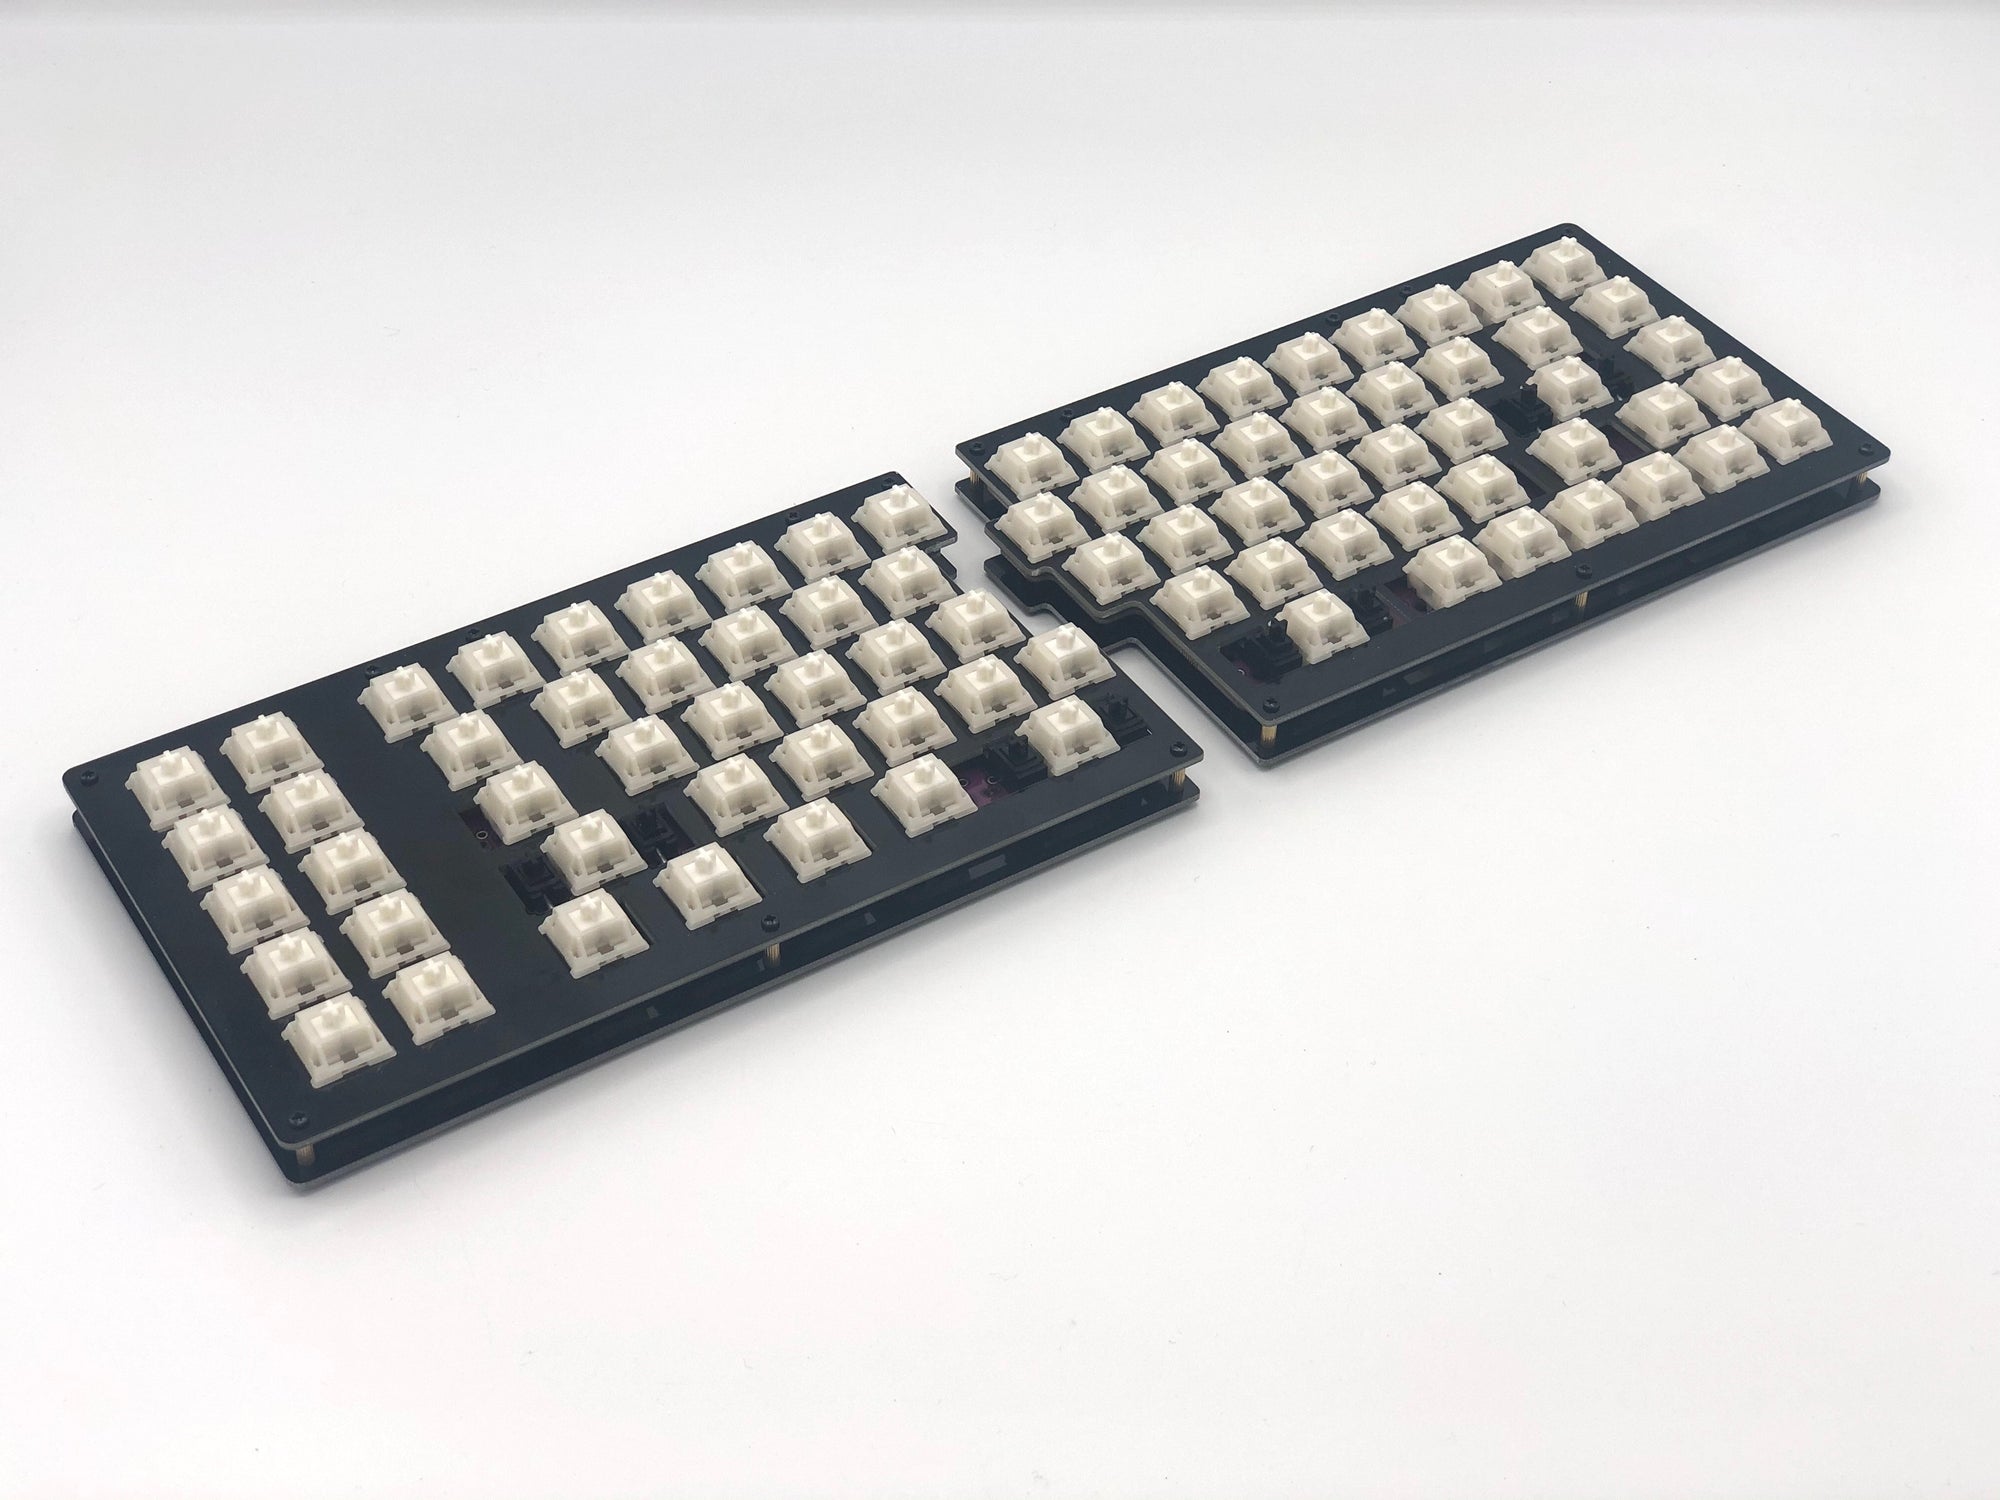 Quefrency keyboard built with white switches and no keycaps.